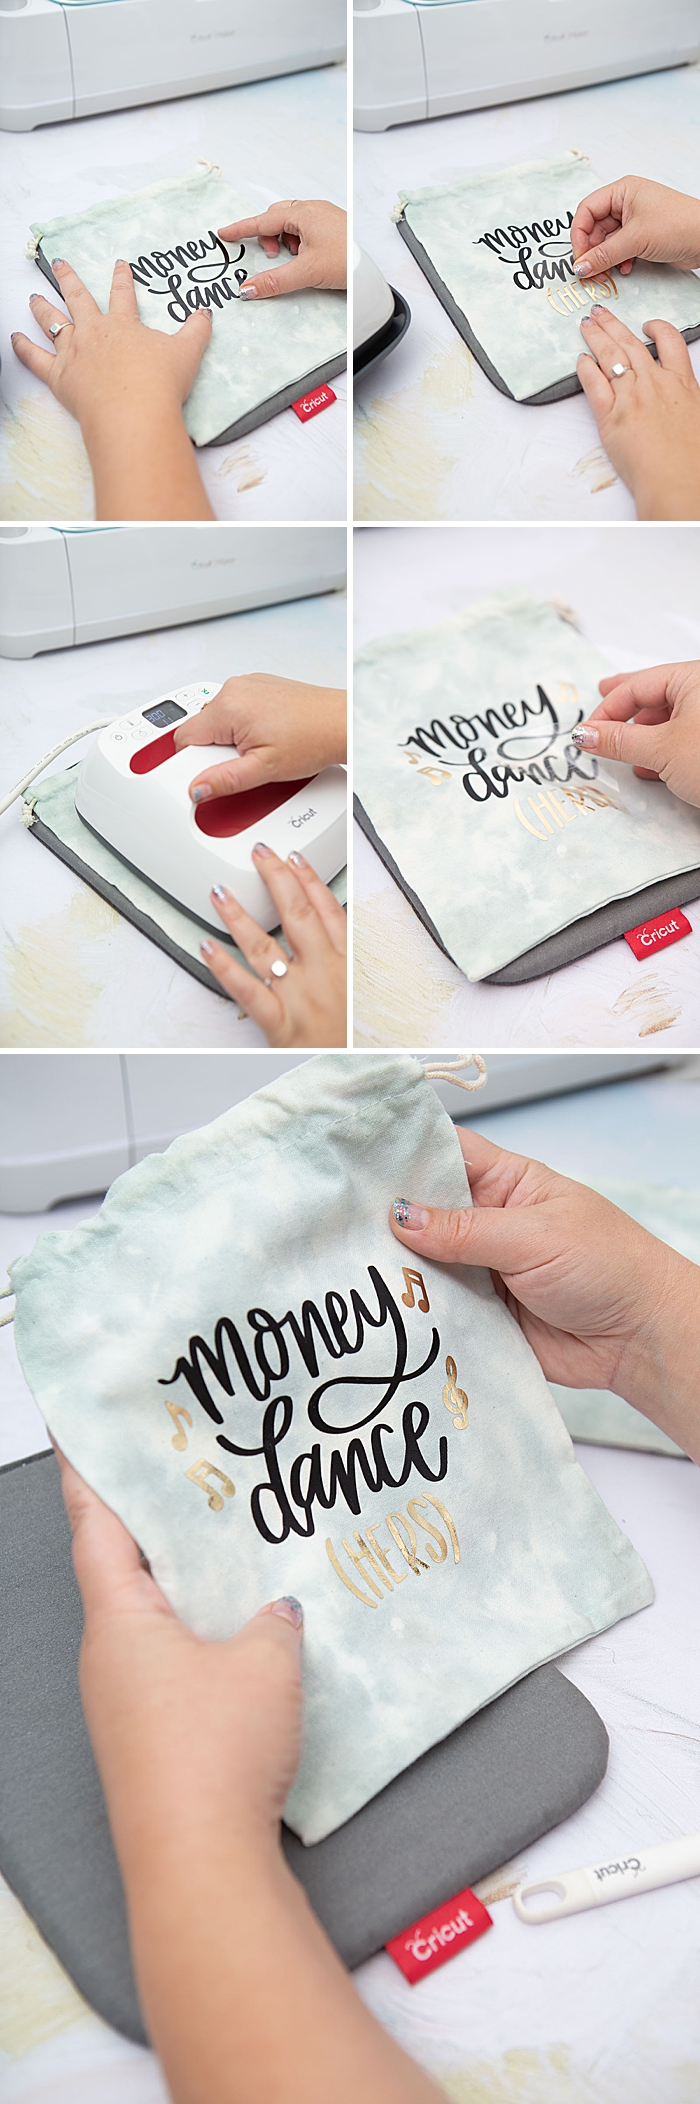 How to make your own Money Dance bags, that are cute!